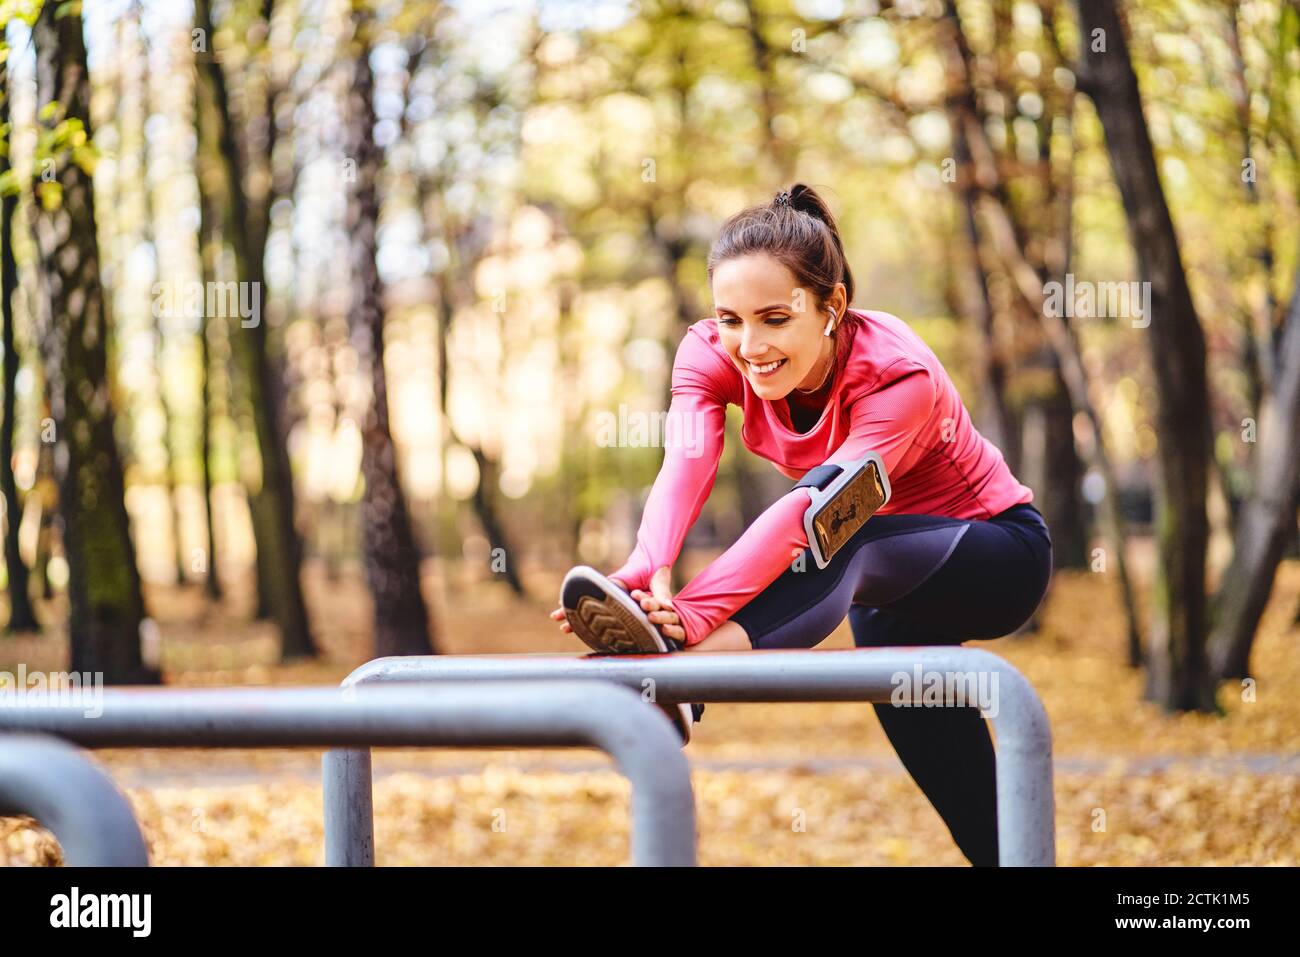 Young female jogger stretching her leg on bicycle stand in autumn forest Stock Photo